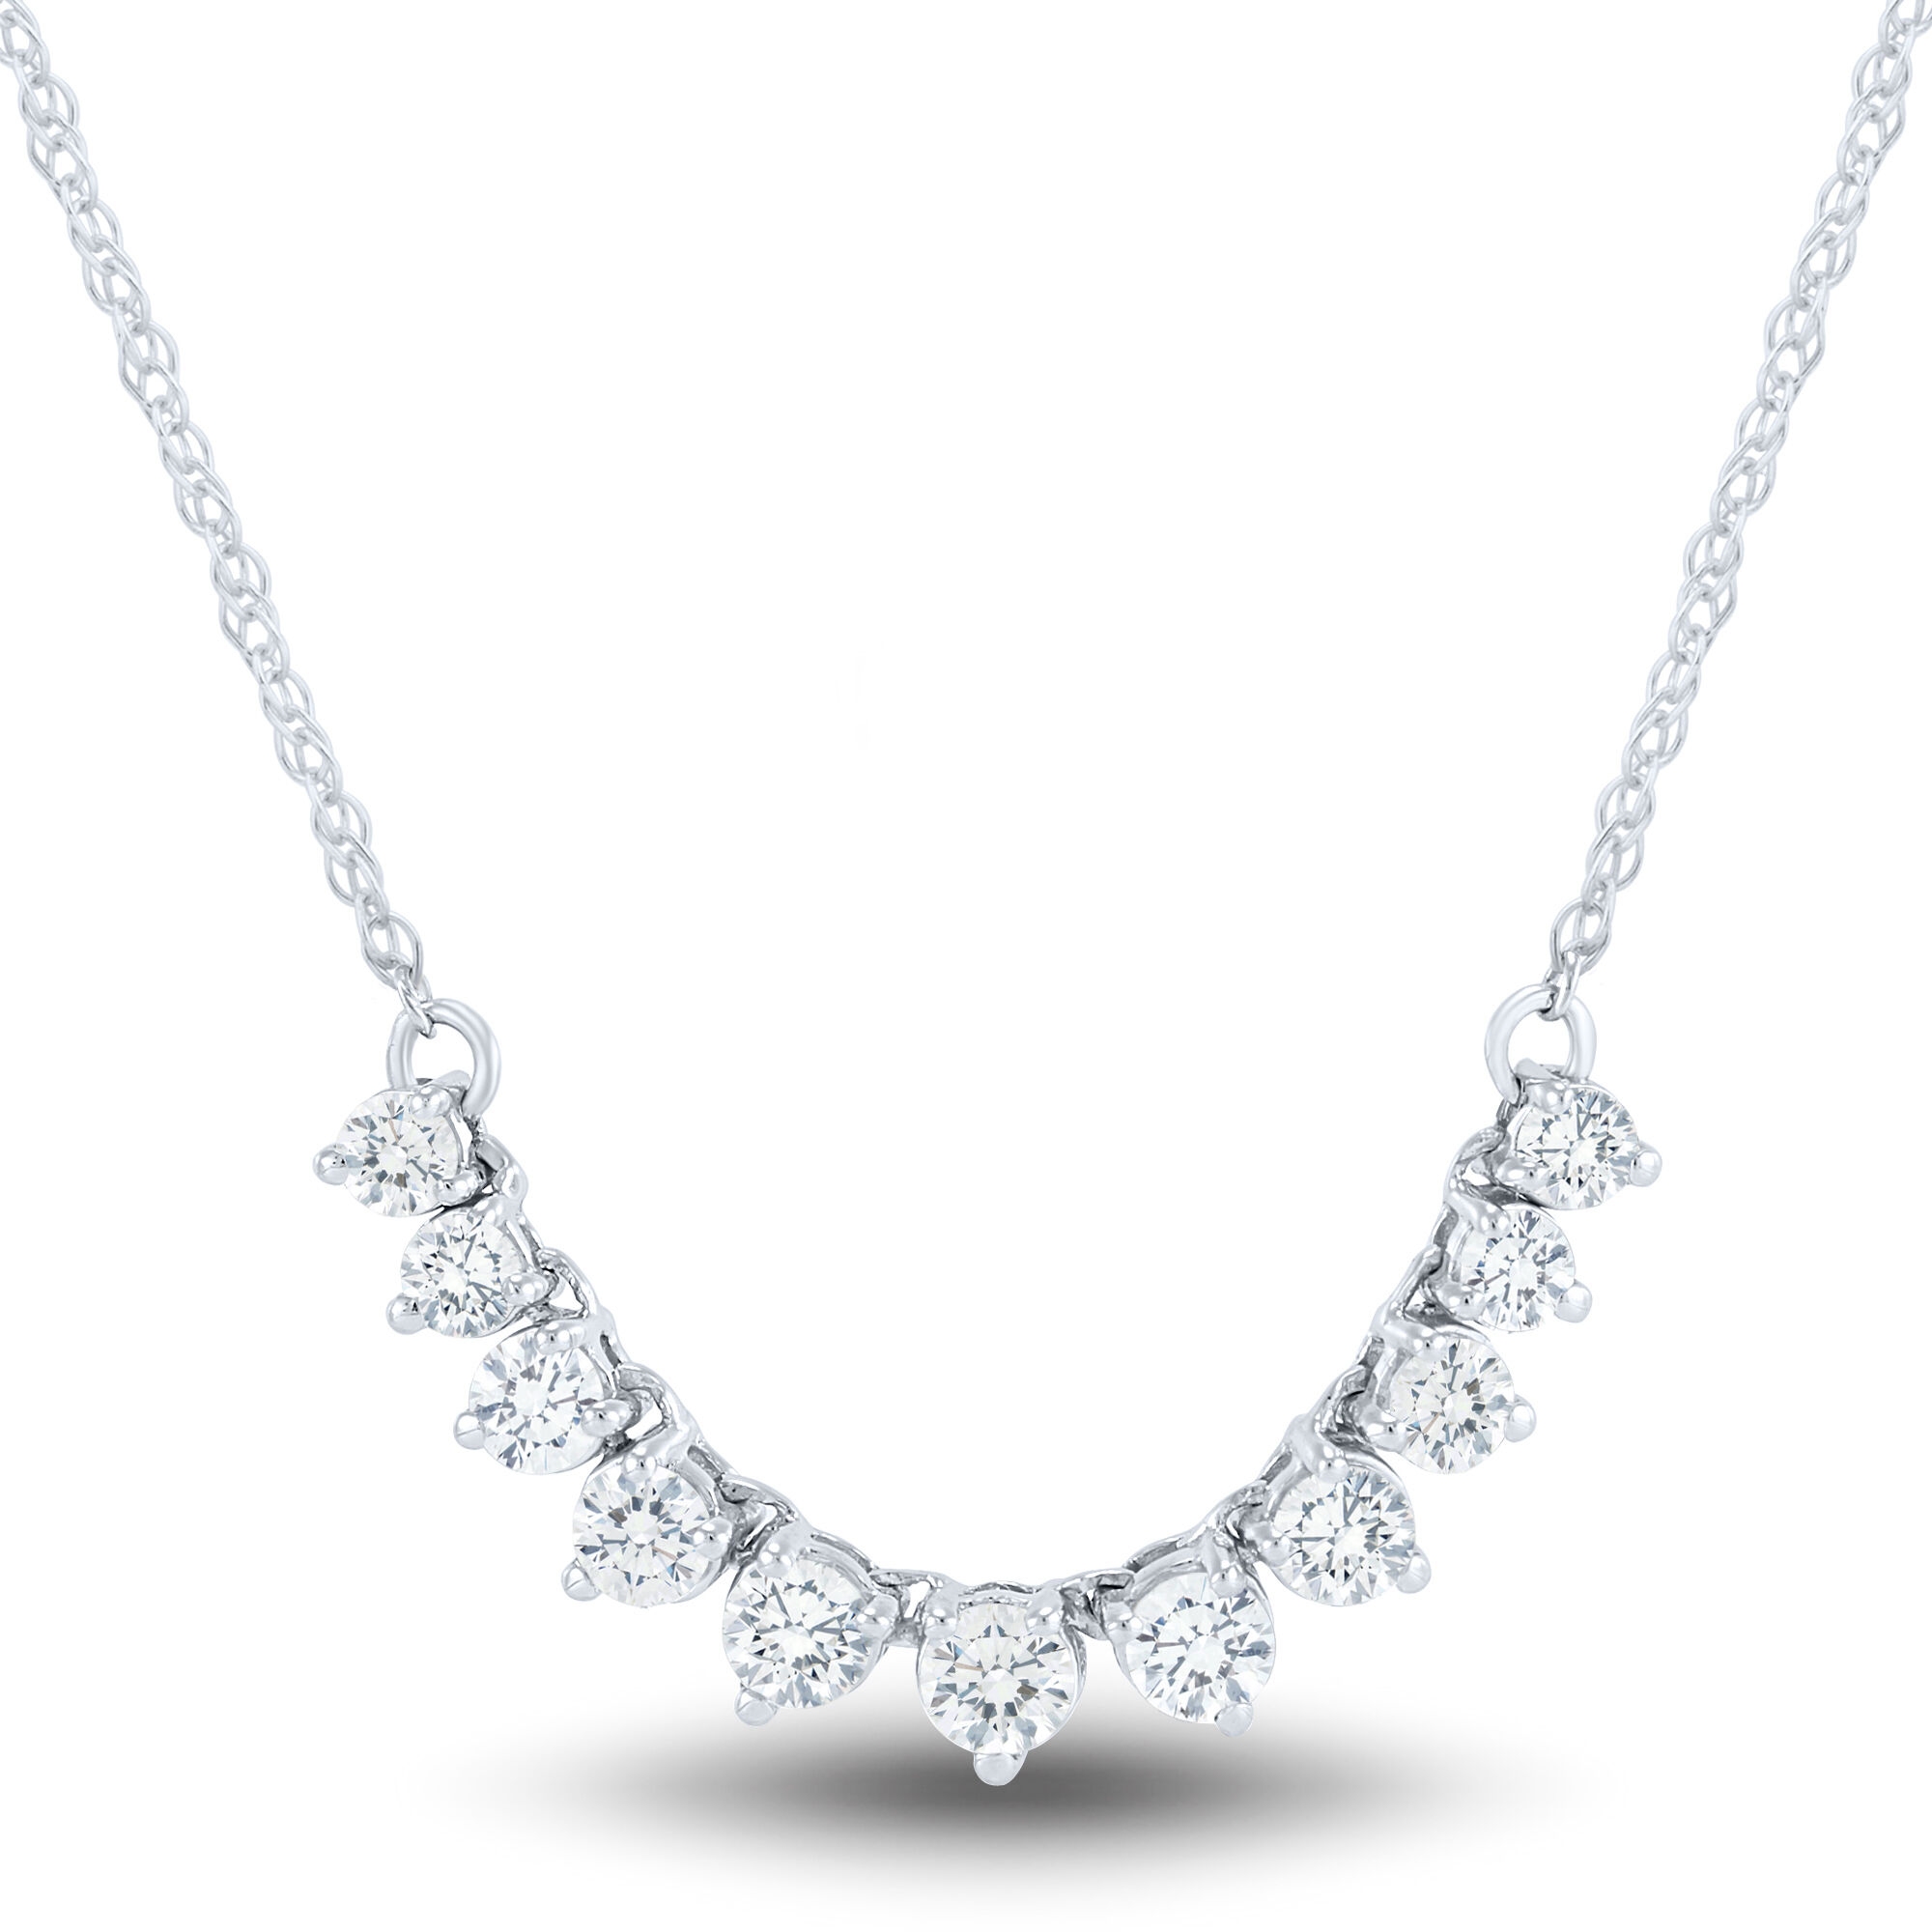 Riviera Line Necklace with Illusion-Set Graduated Diamonds in 18K White  Gold, Style #N-16952-GROUP-18KW | Diamond, 18k white gold, Wedding day  jewelry